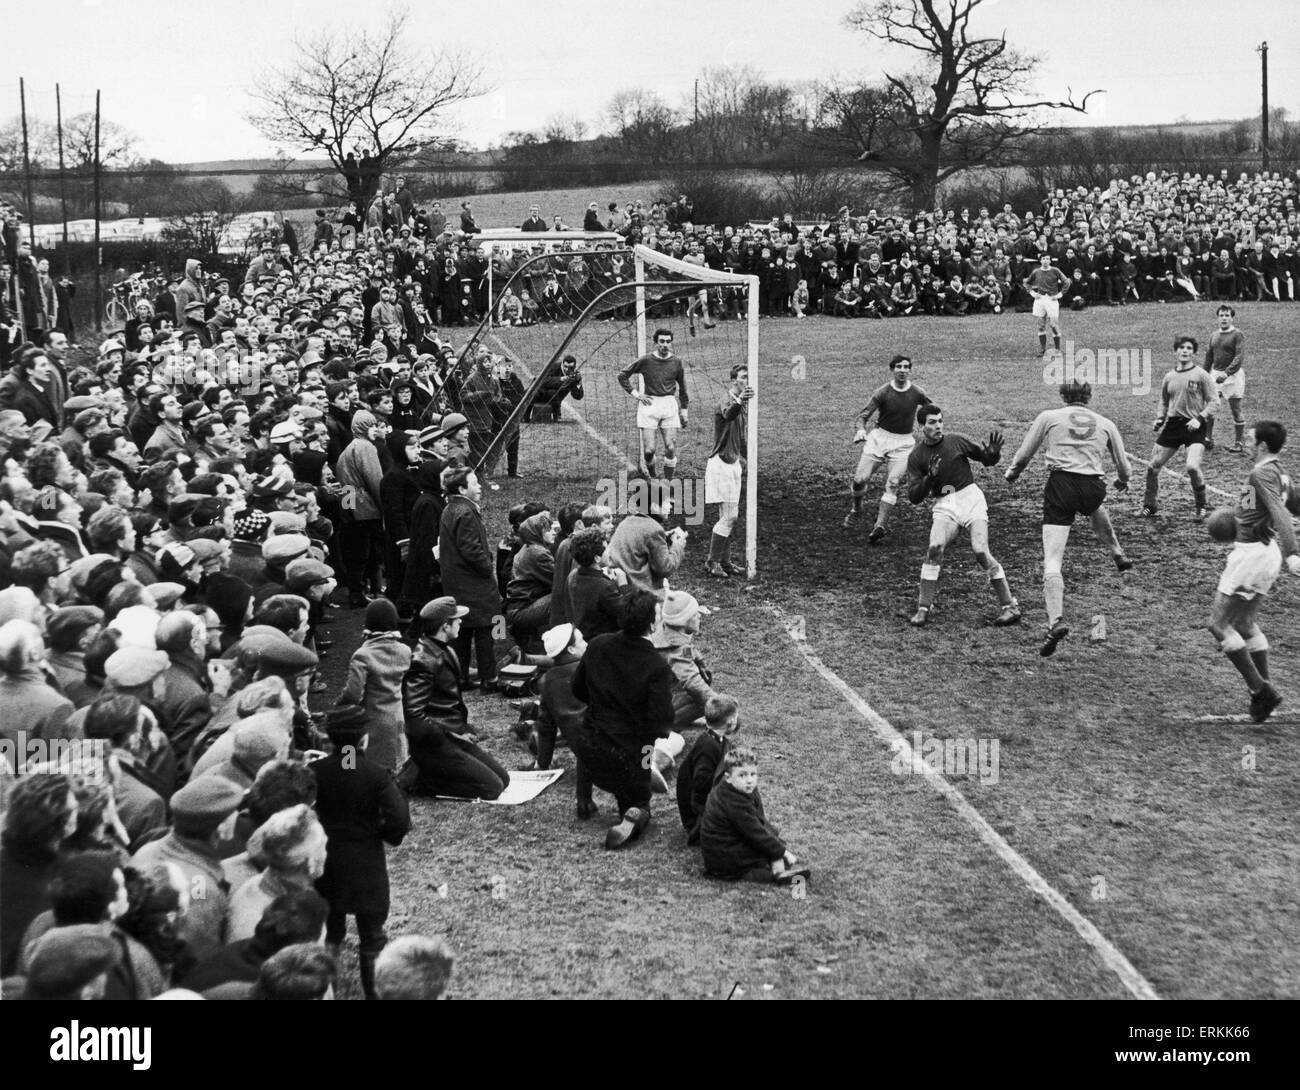 The closing stages of the FA Amateur Cup Third Round match between Alvechurch and Wealdstone at Lye Meadow. Alvechurch won 4-1.  15th February 1965. Stock Photo